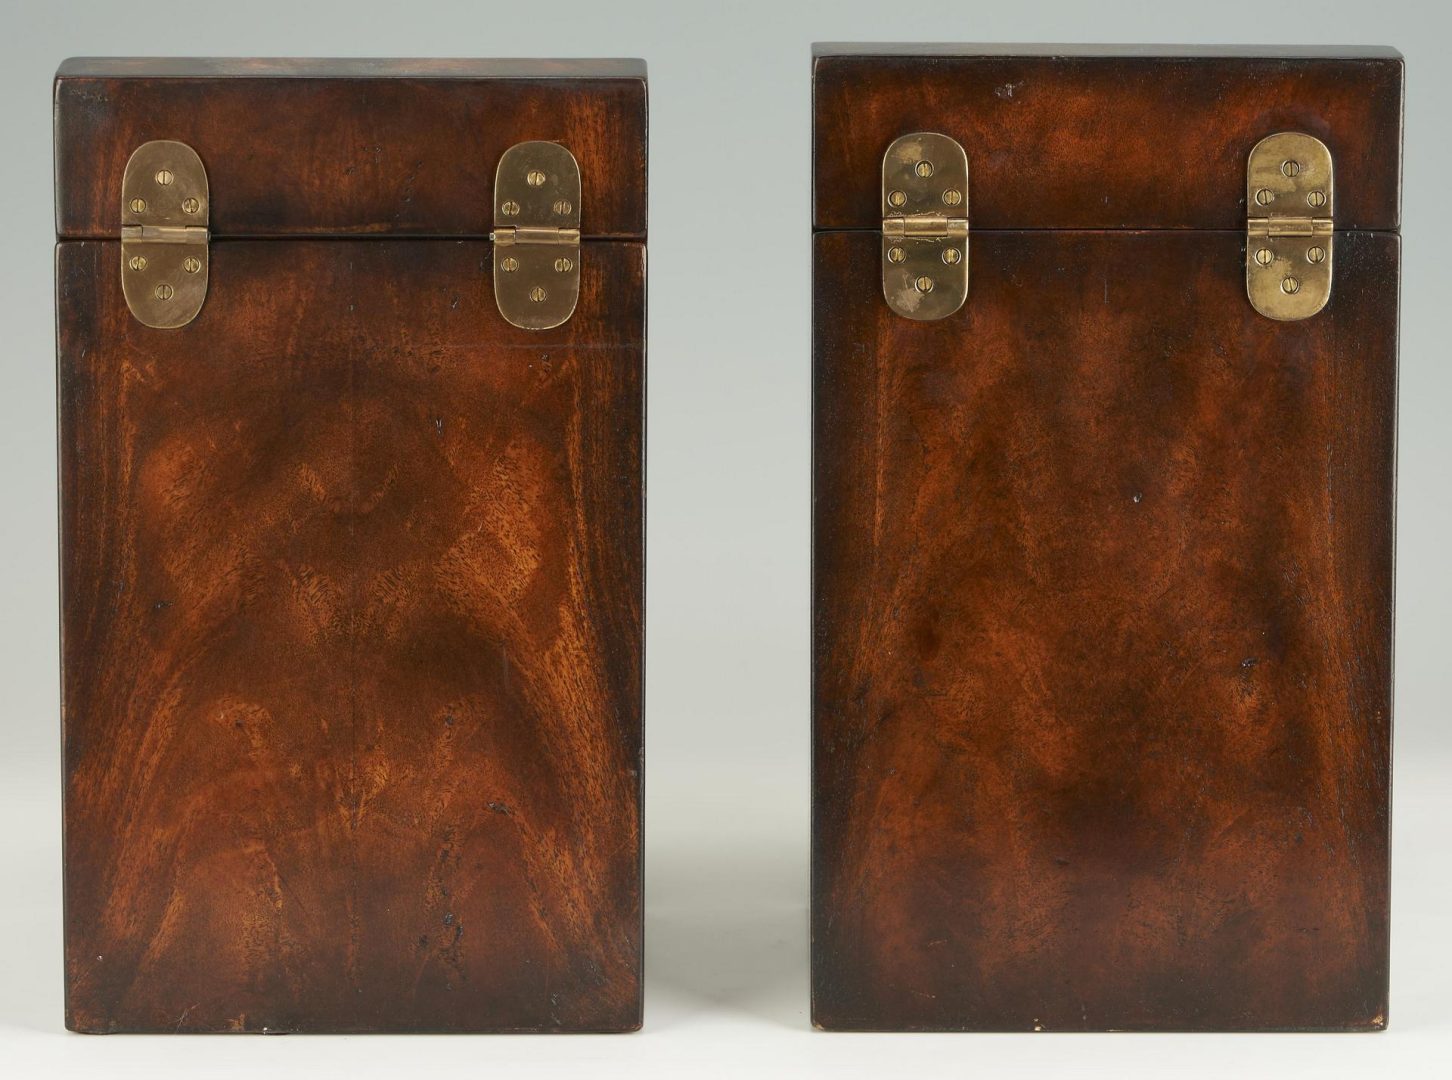 Lot 445: Pair Theodore Alexander Althorp Reproduction Knife Boxes